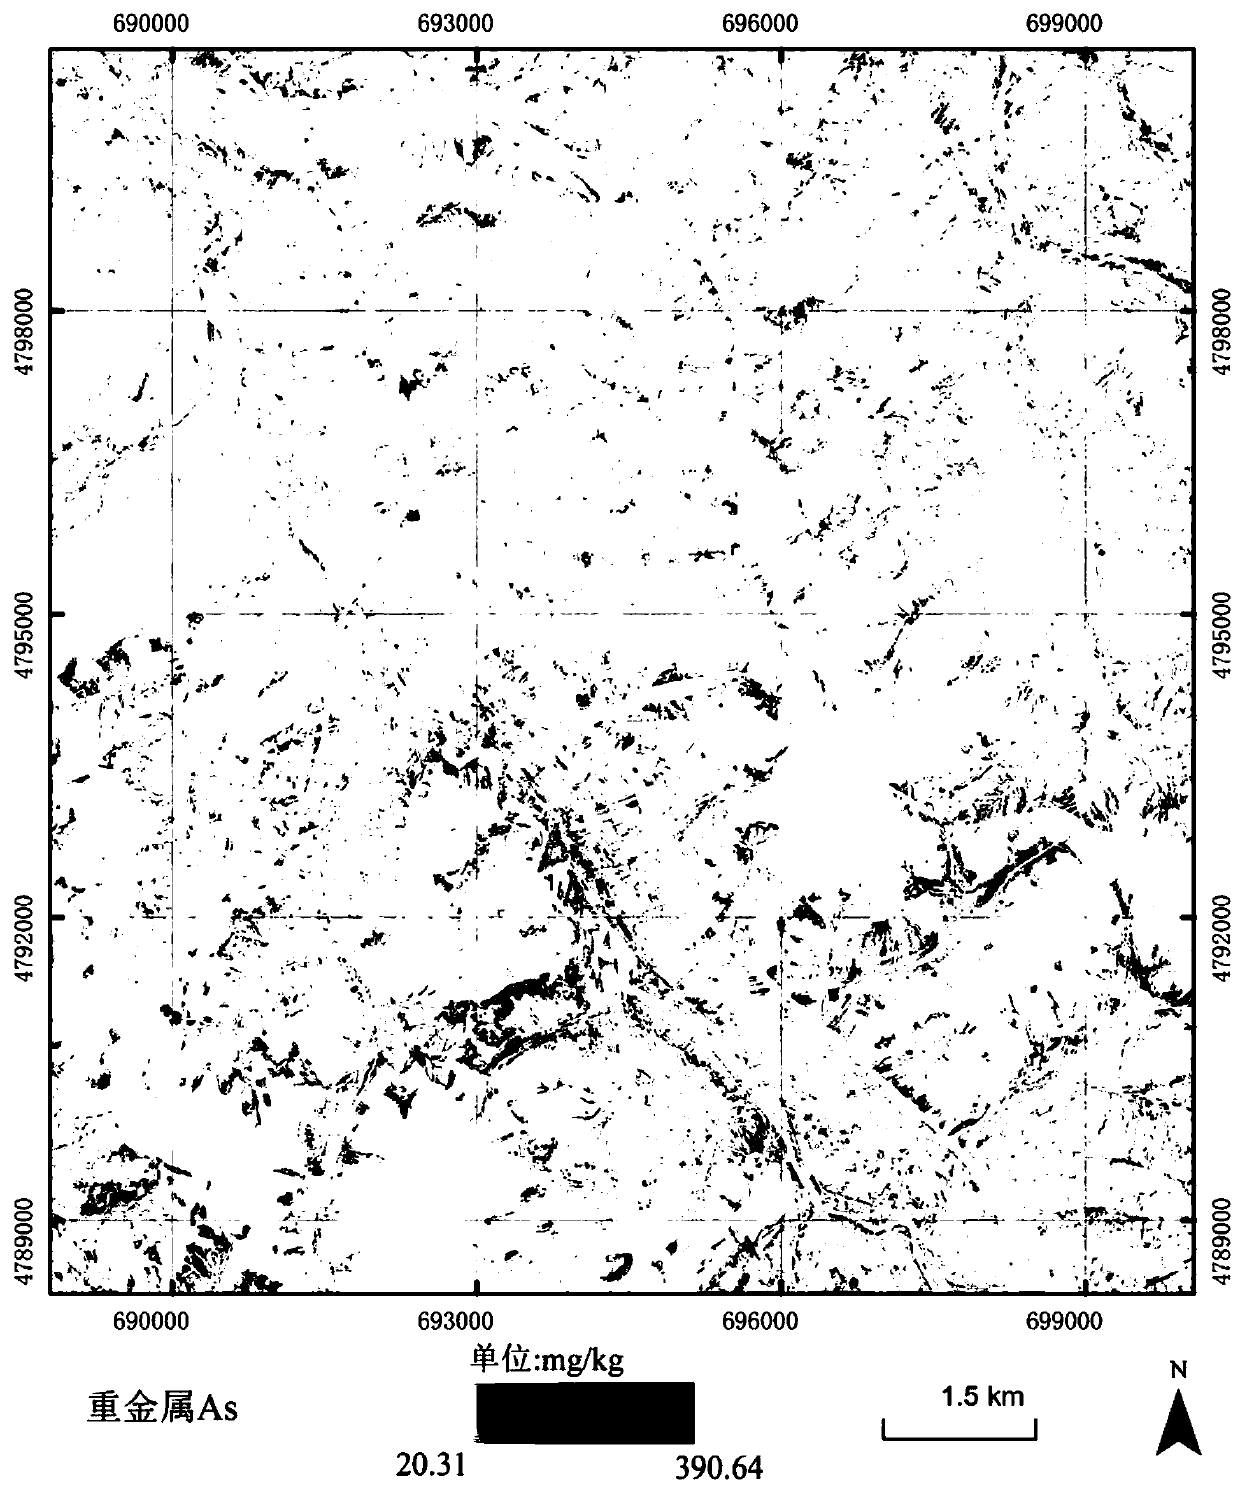 Method for evaluating soil heavy metal concentration in hyperspectral image based on spatial weight constraint and variational self-encoding feature extraction